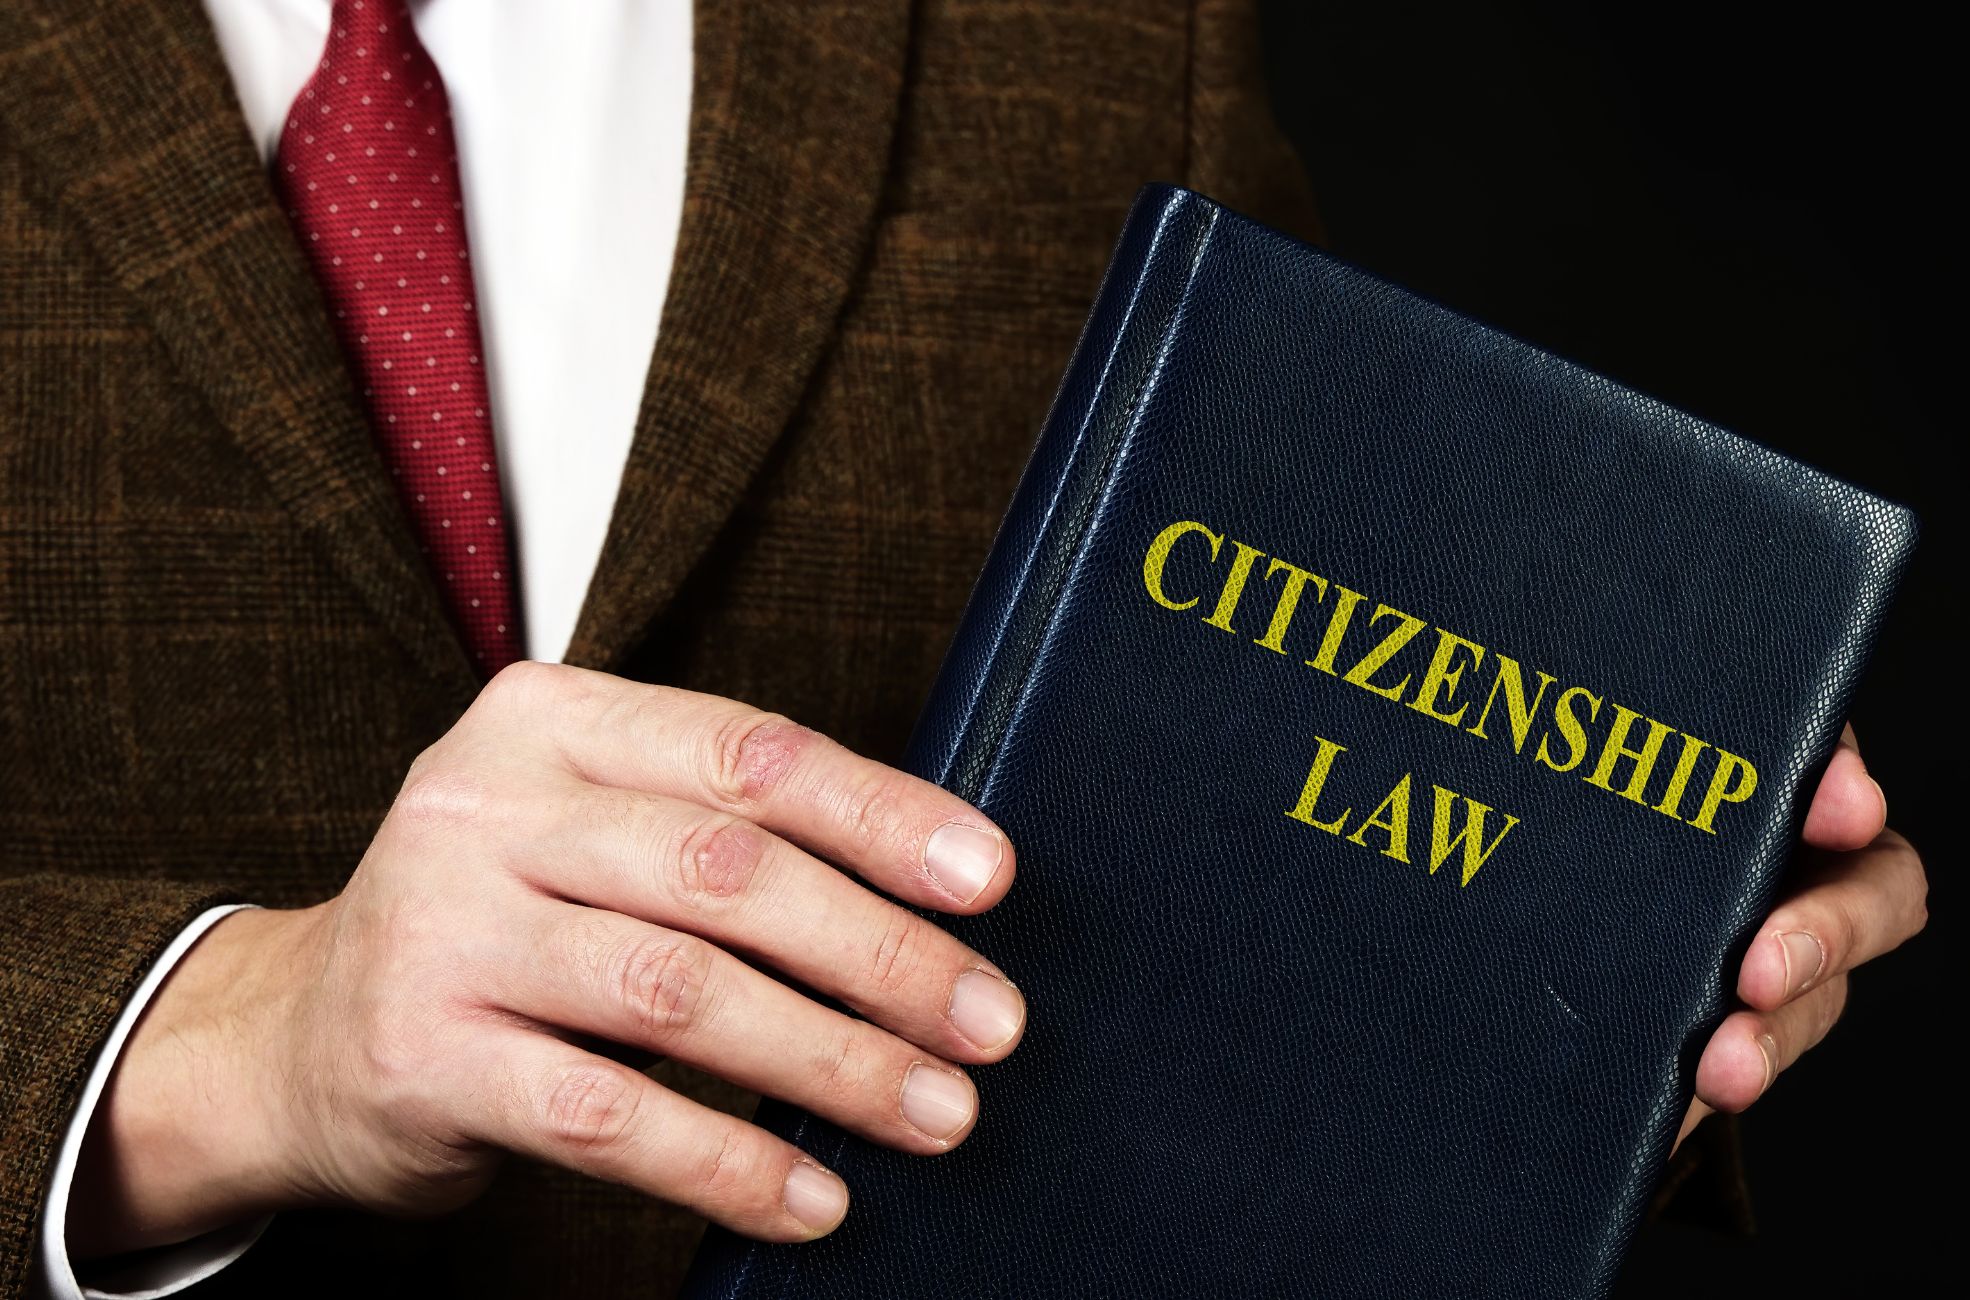 Stock Photo Book Held Title Citizenship Law